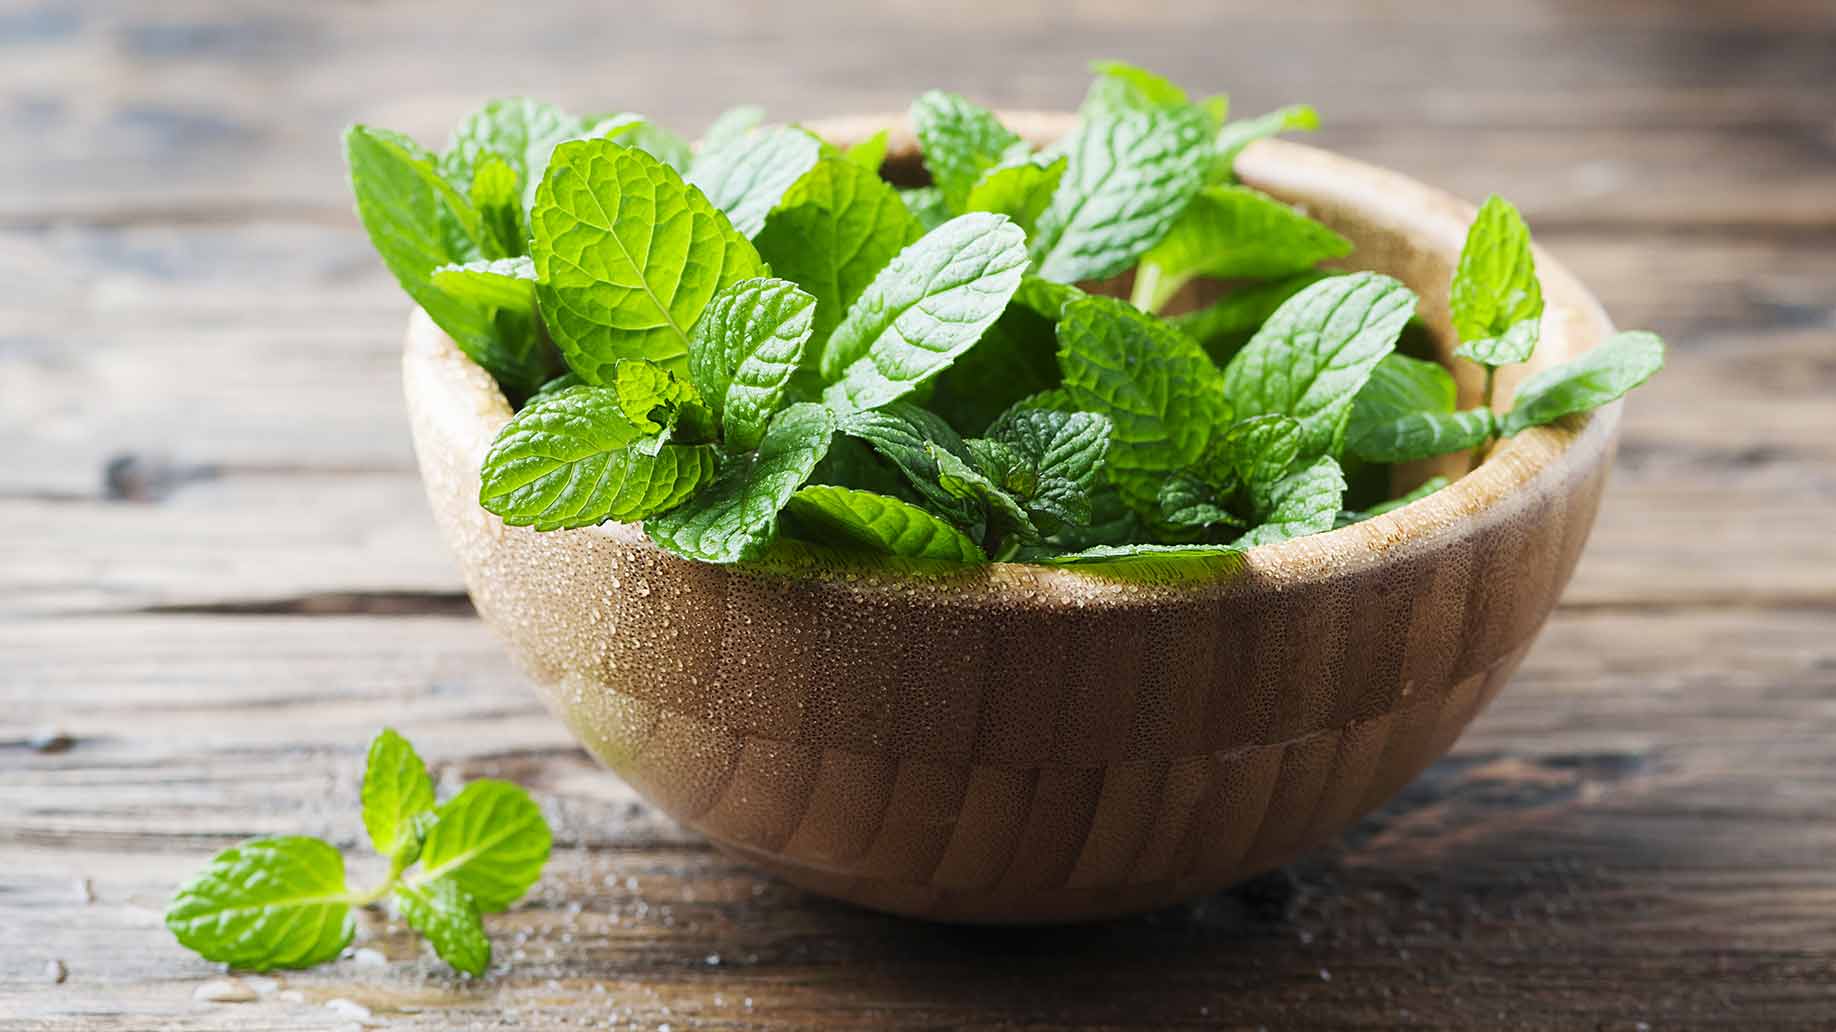 peppermint leaves hair growth natural shampoo ingredient